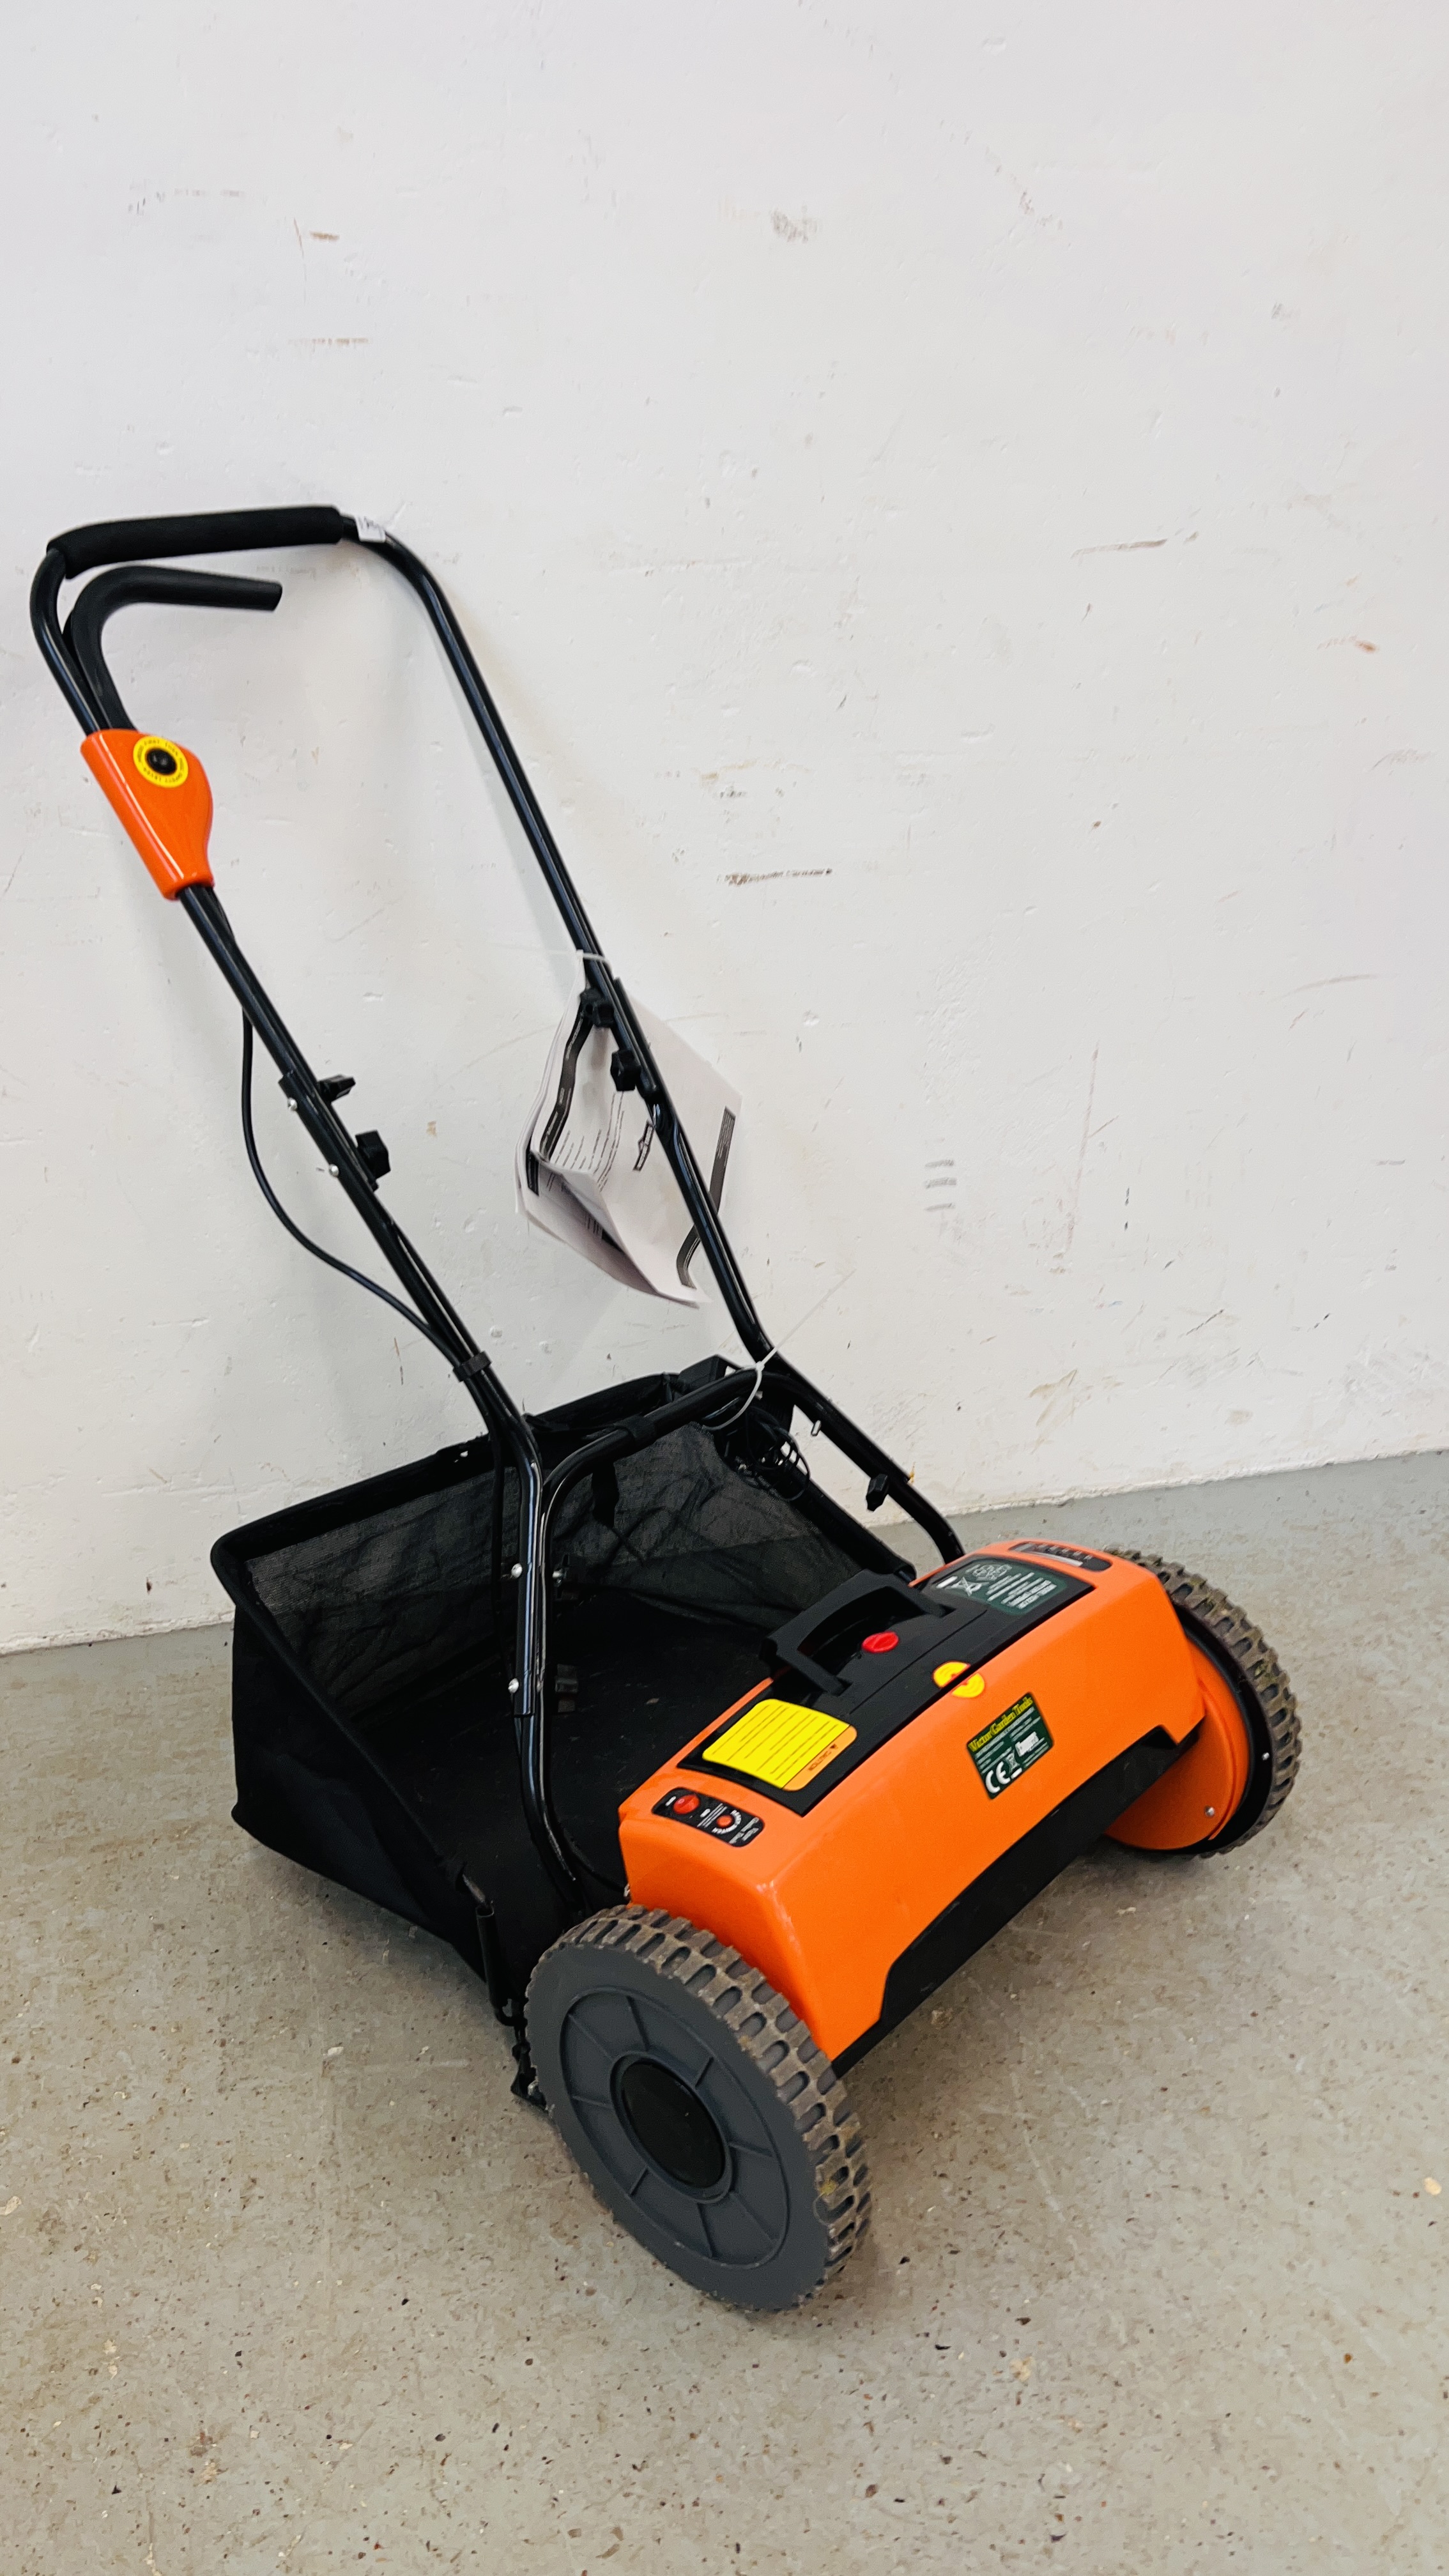 A VICTOR GARDEN TOOLS 24 VOLT RECHARGEABLE CYLINDER MOWER COMPLETE WITH CHARGER AND MANUAL. - Image 2 of 6